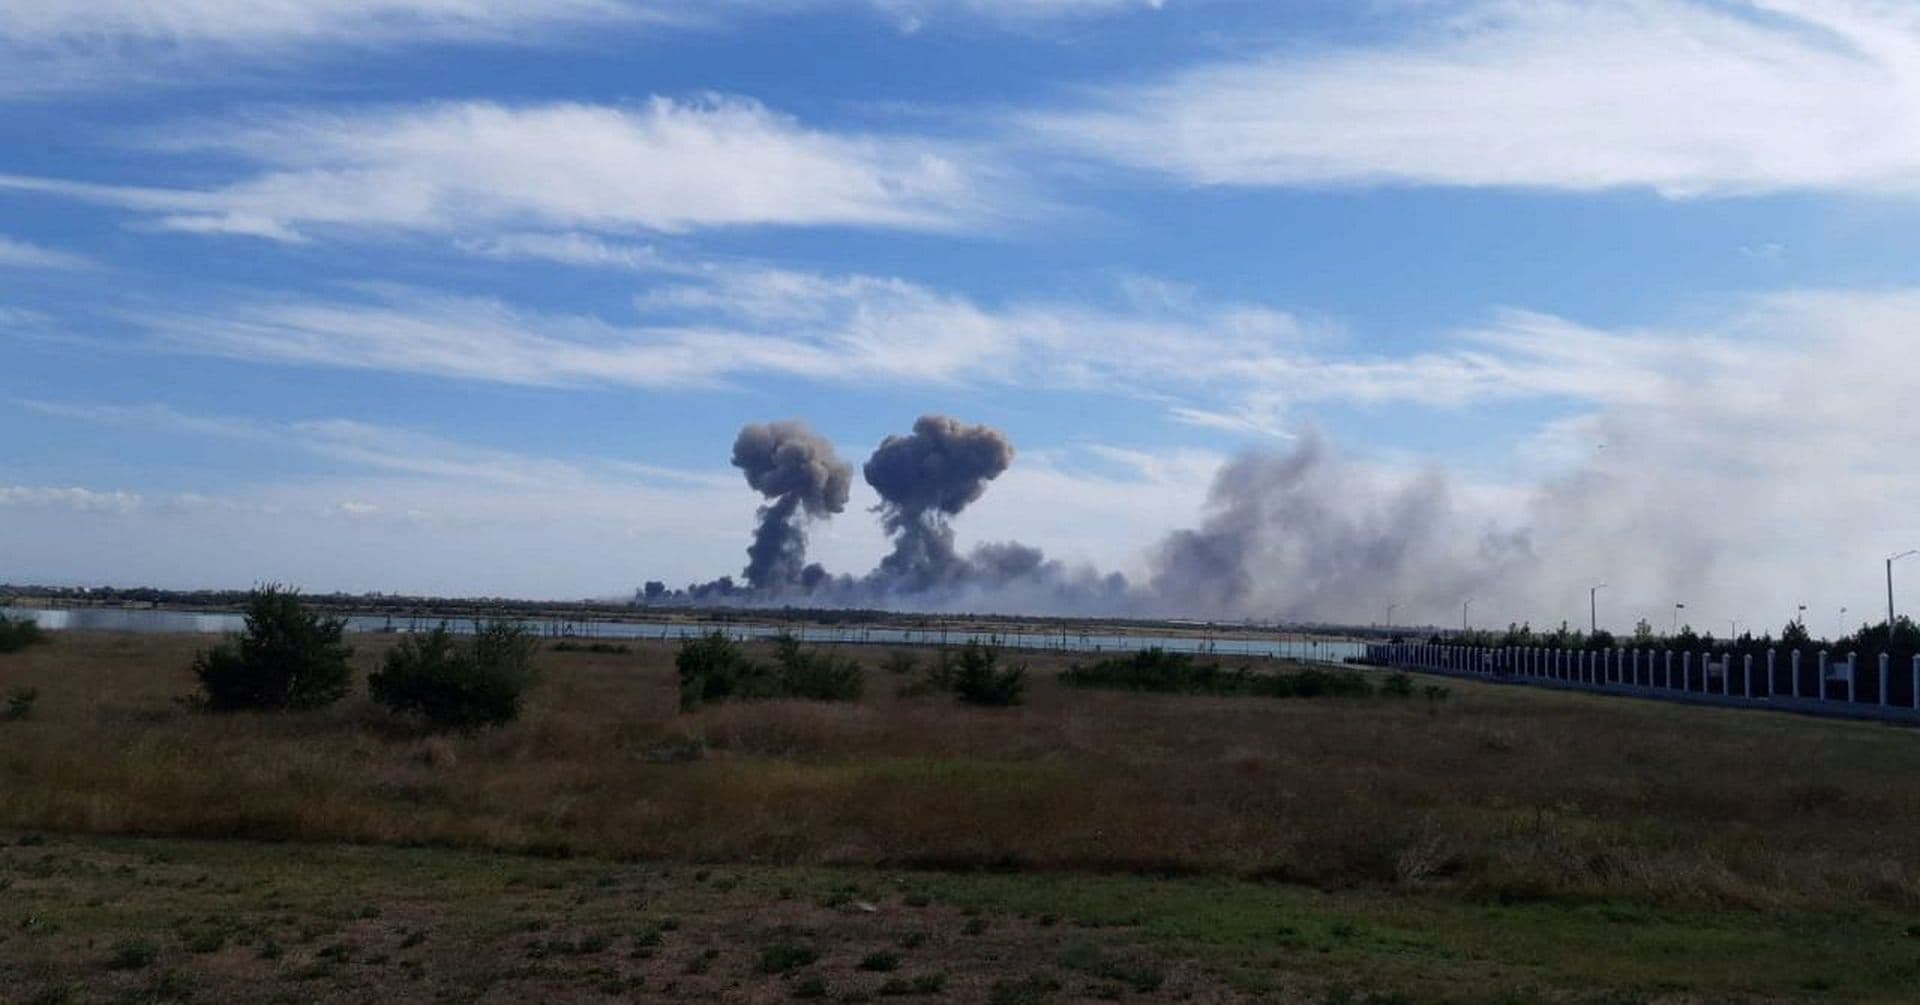 Smoke rises after explosions were heard from the direction of a Russian military airbase near Novofedorivka, Crimea